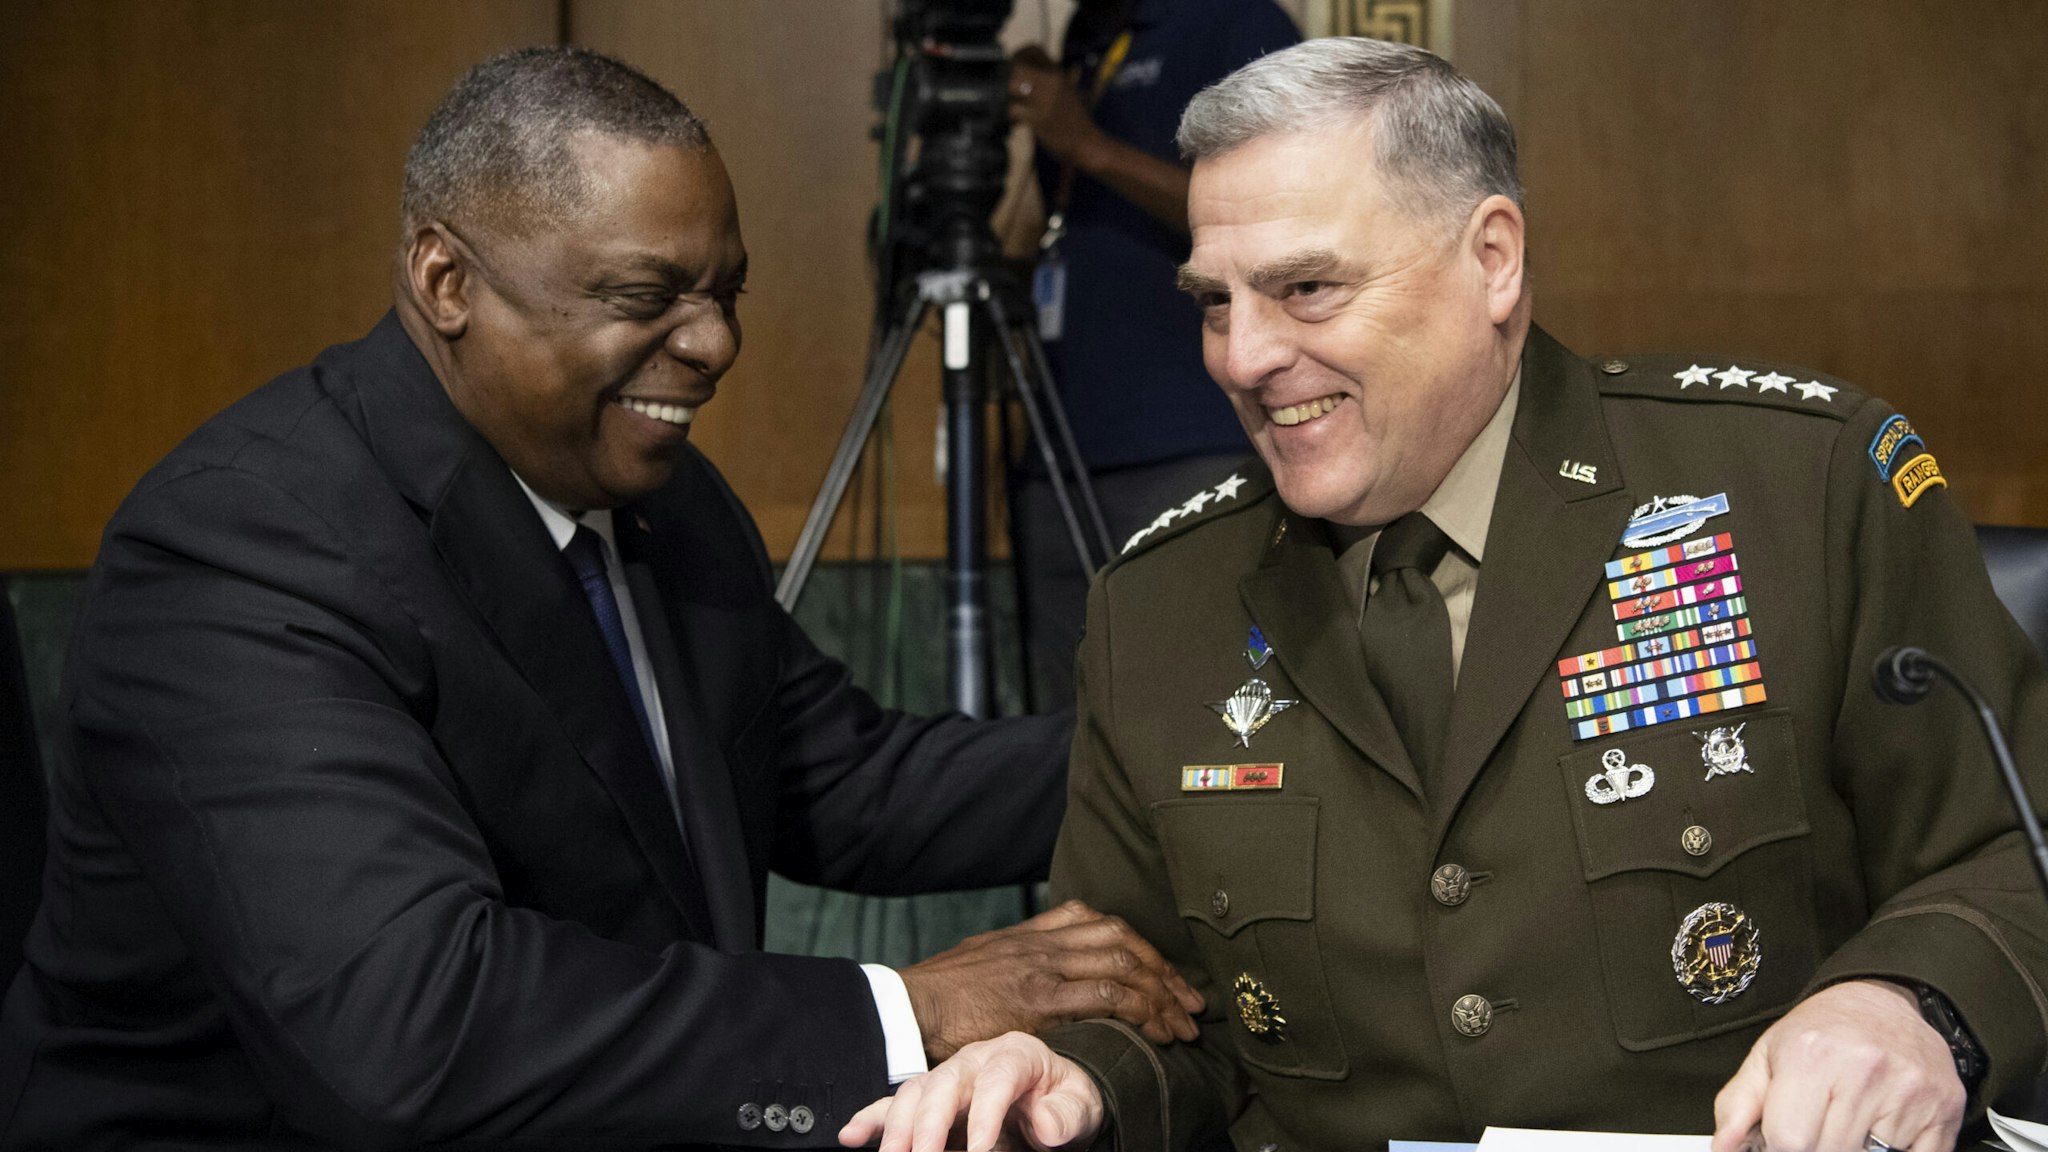 WASHINGTON, DC - JUNE 17: Secretary of Defense Lloyd Austin, left, and Chairman of the Joint Chiefs of Staff Gen. Mark Milley talk before the start of the Senate Appropriations Committee hearing on "A Review of the FY2022 Department of Defense Budget Request' on June 17, 2021 in Washington, DC. The hearings are to examine proposed budget estimates and justification for fiscal year 2022 for the Department of Defense.